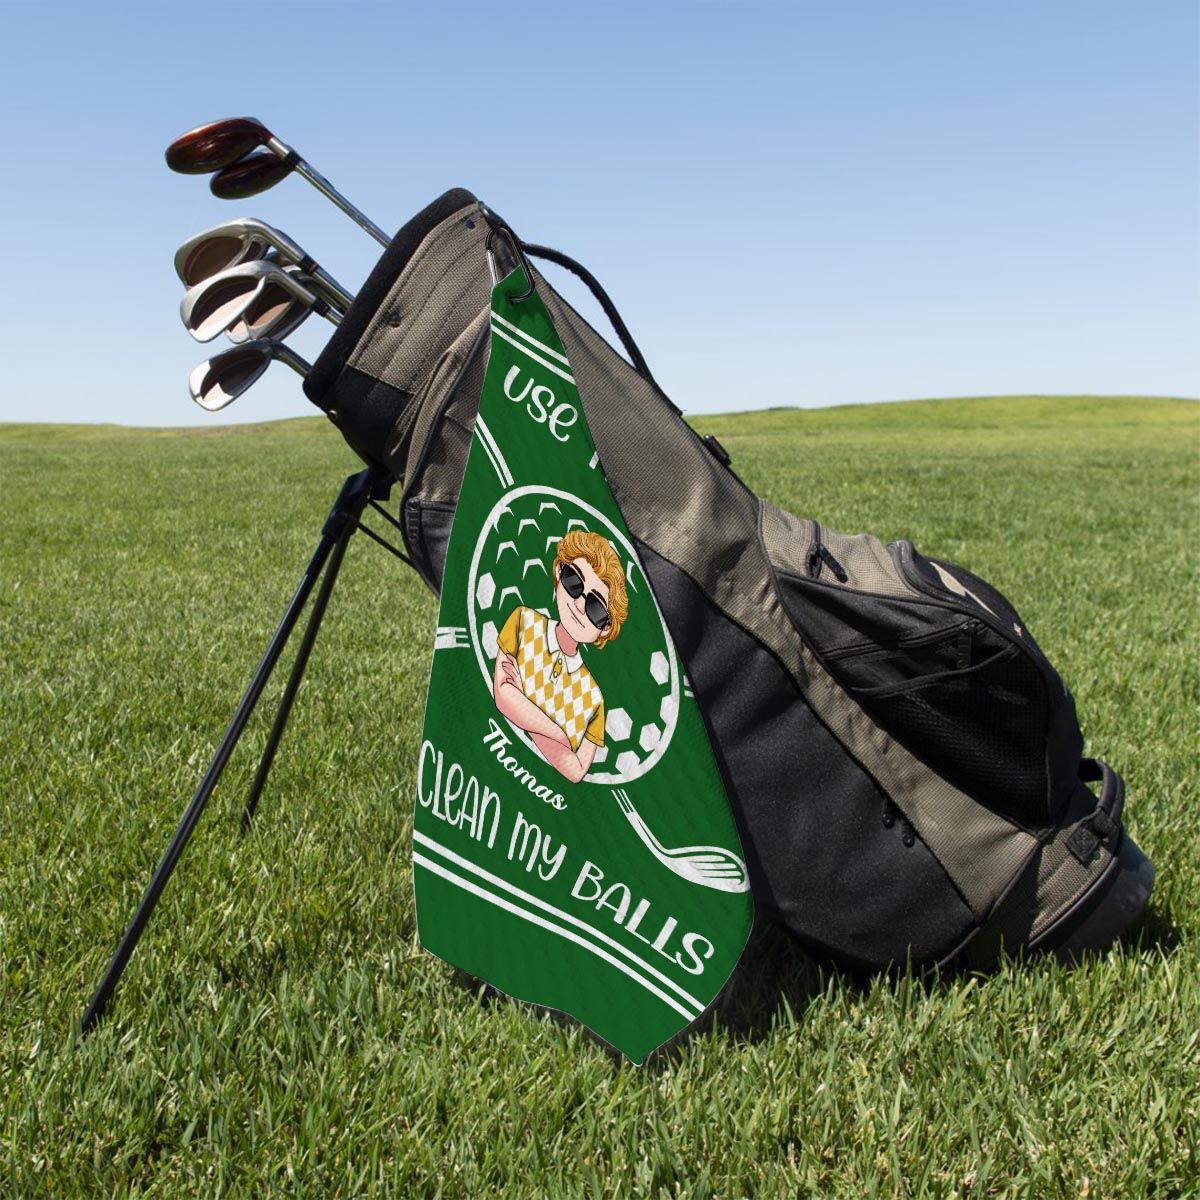 I use this towel - Personalized Golf Golf Towel